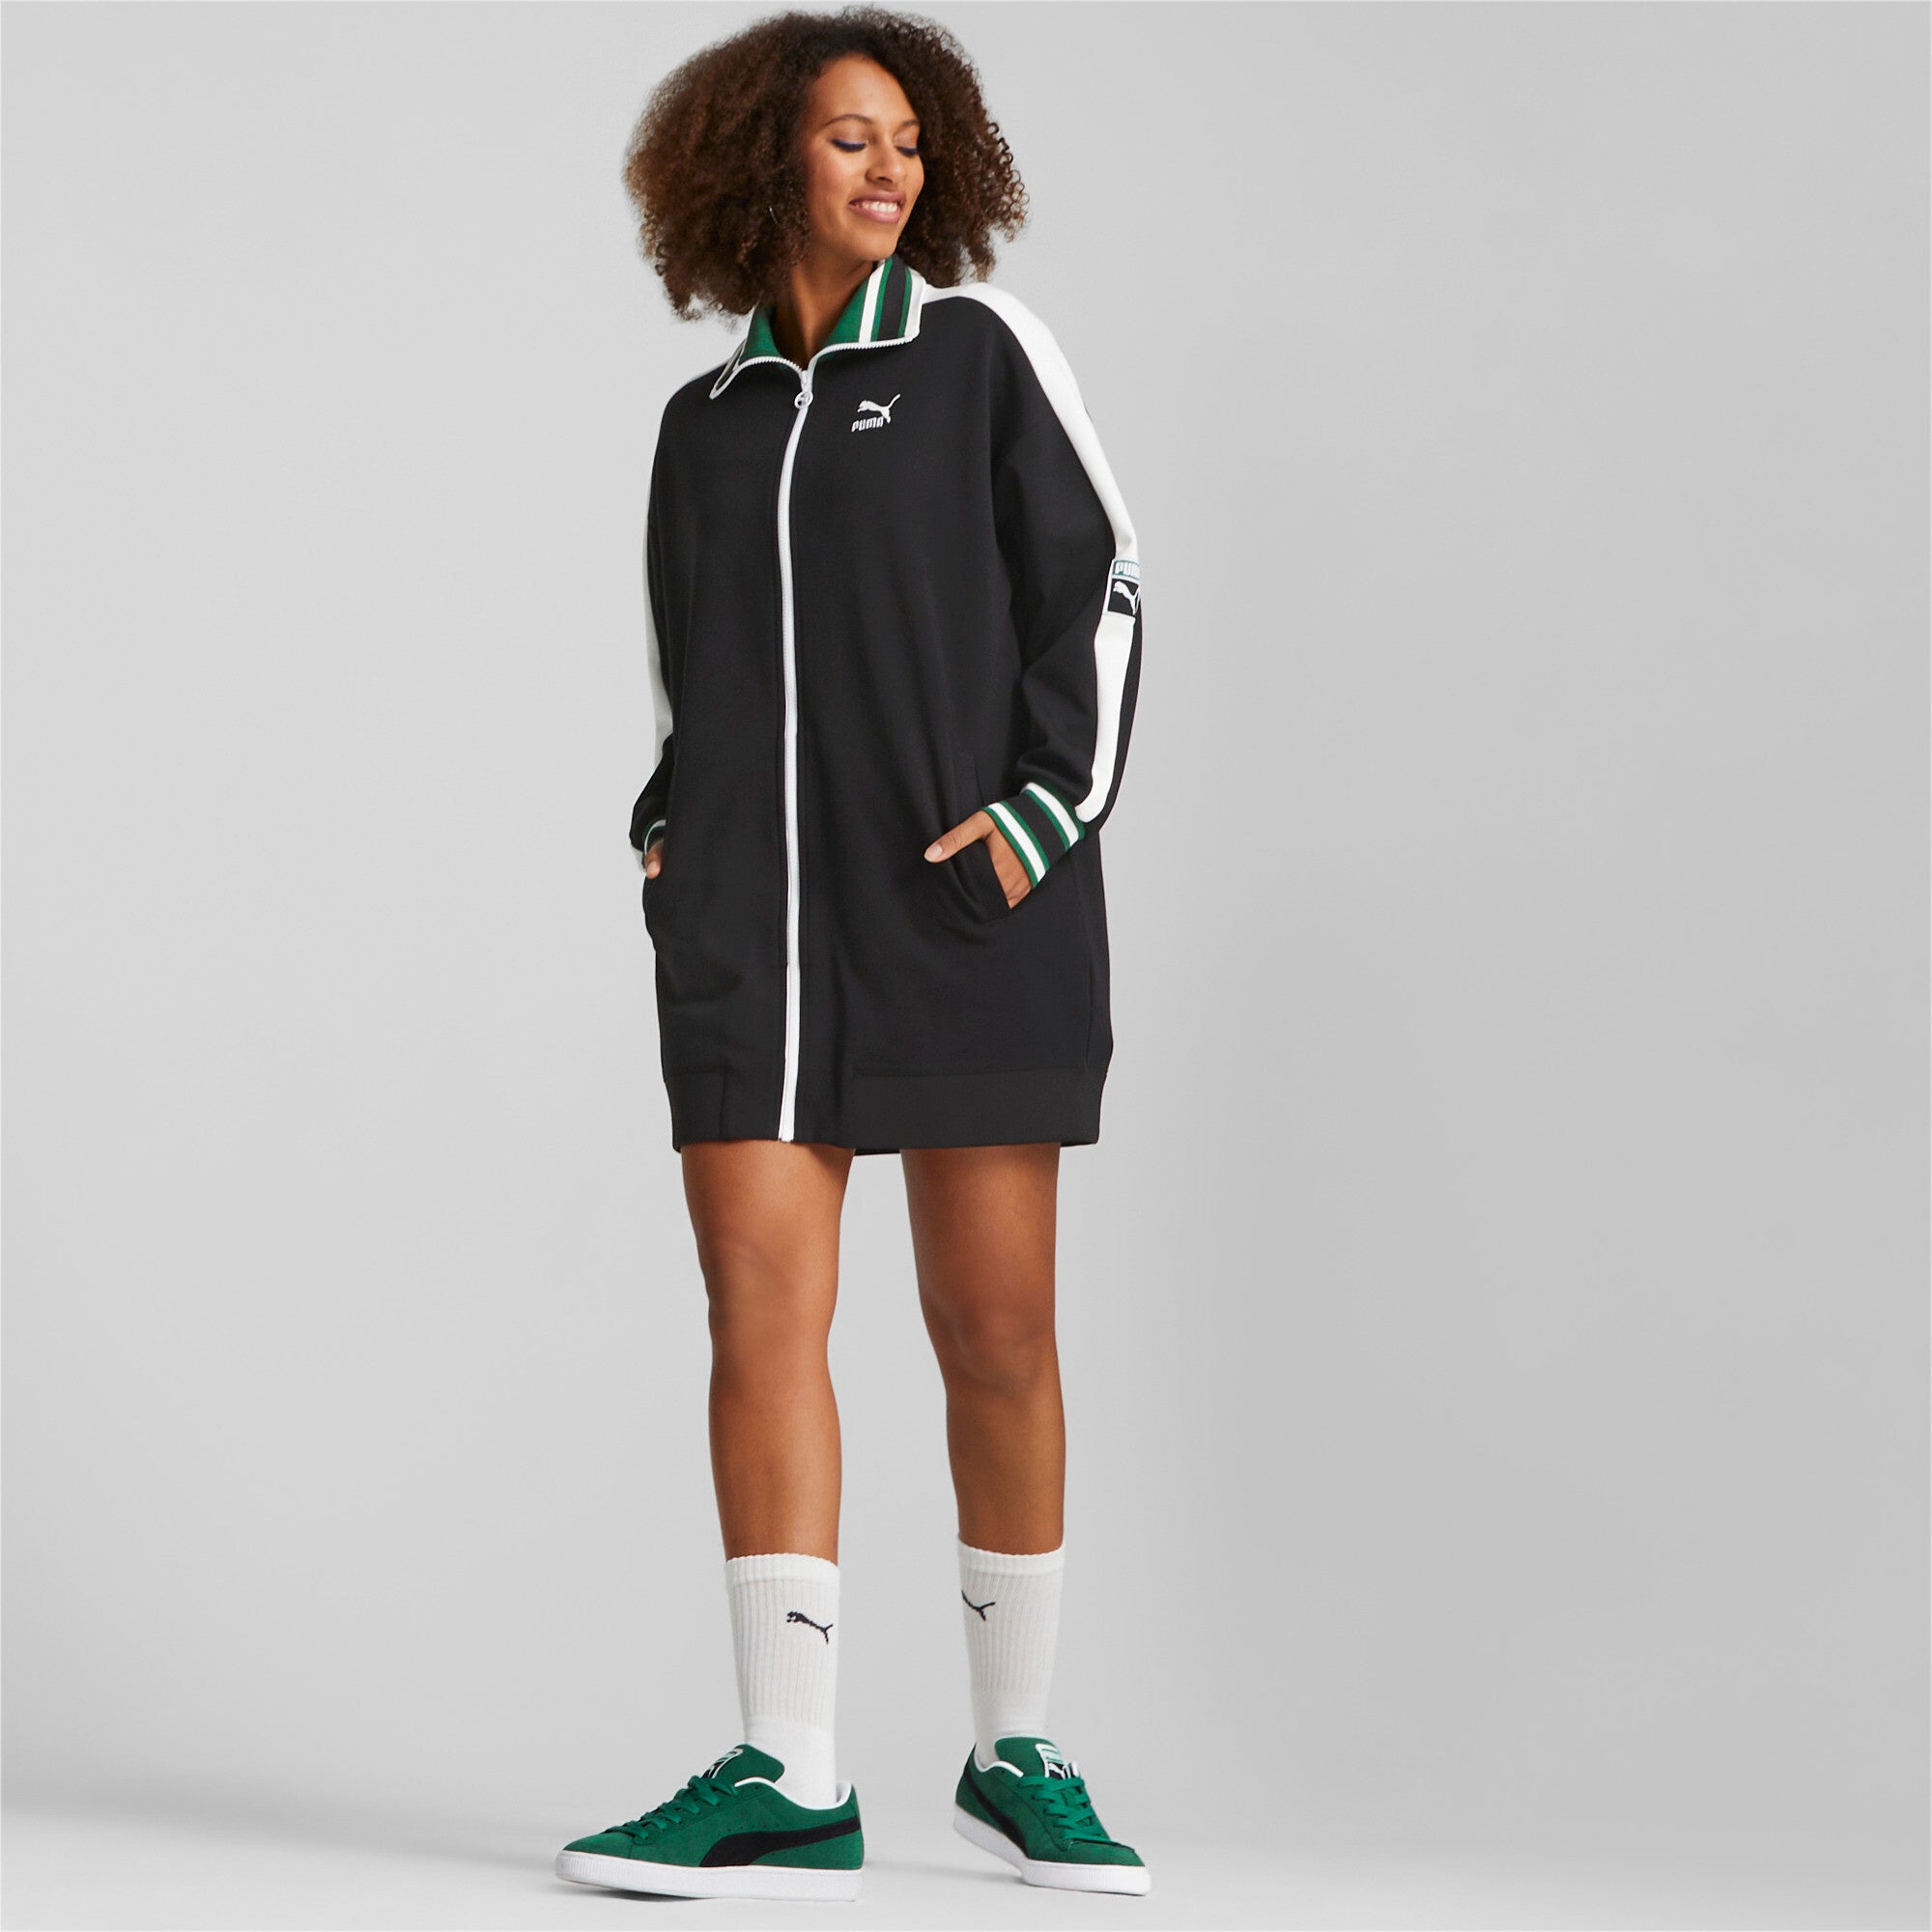 WOMENS T7 ARCHIVE REMASTERED TRACK JACKET - 62025801